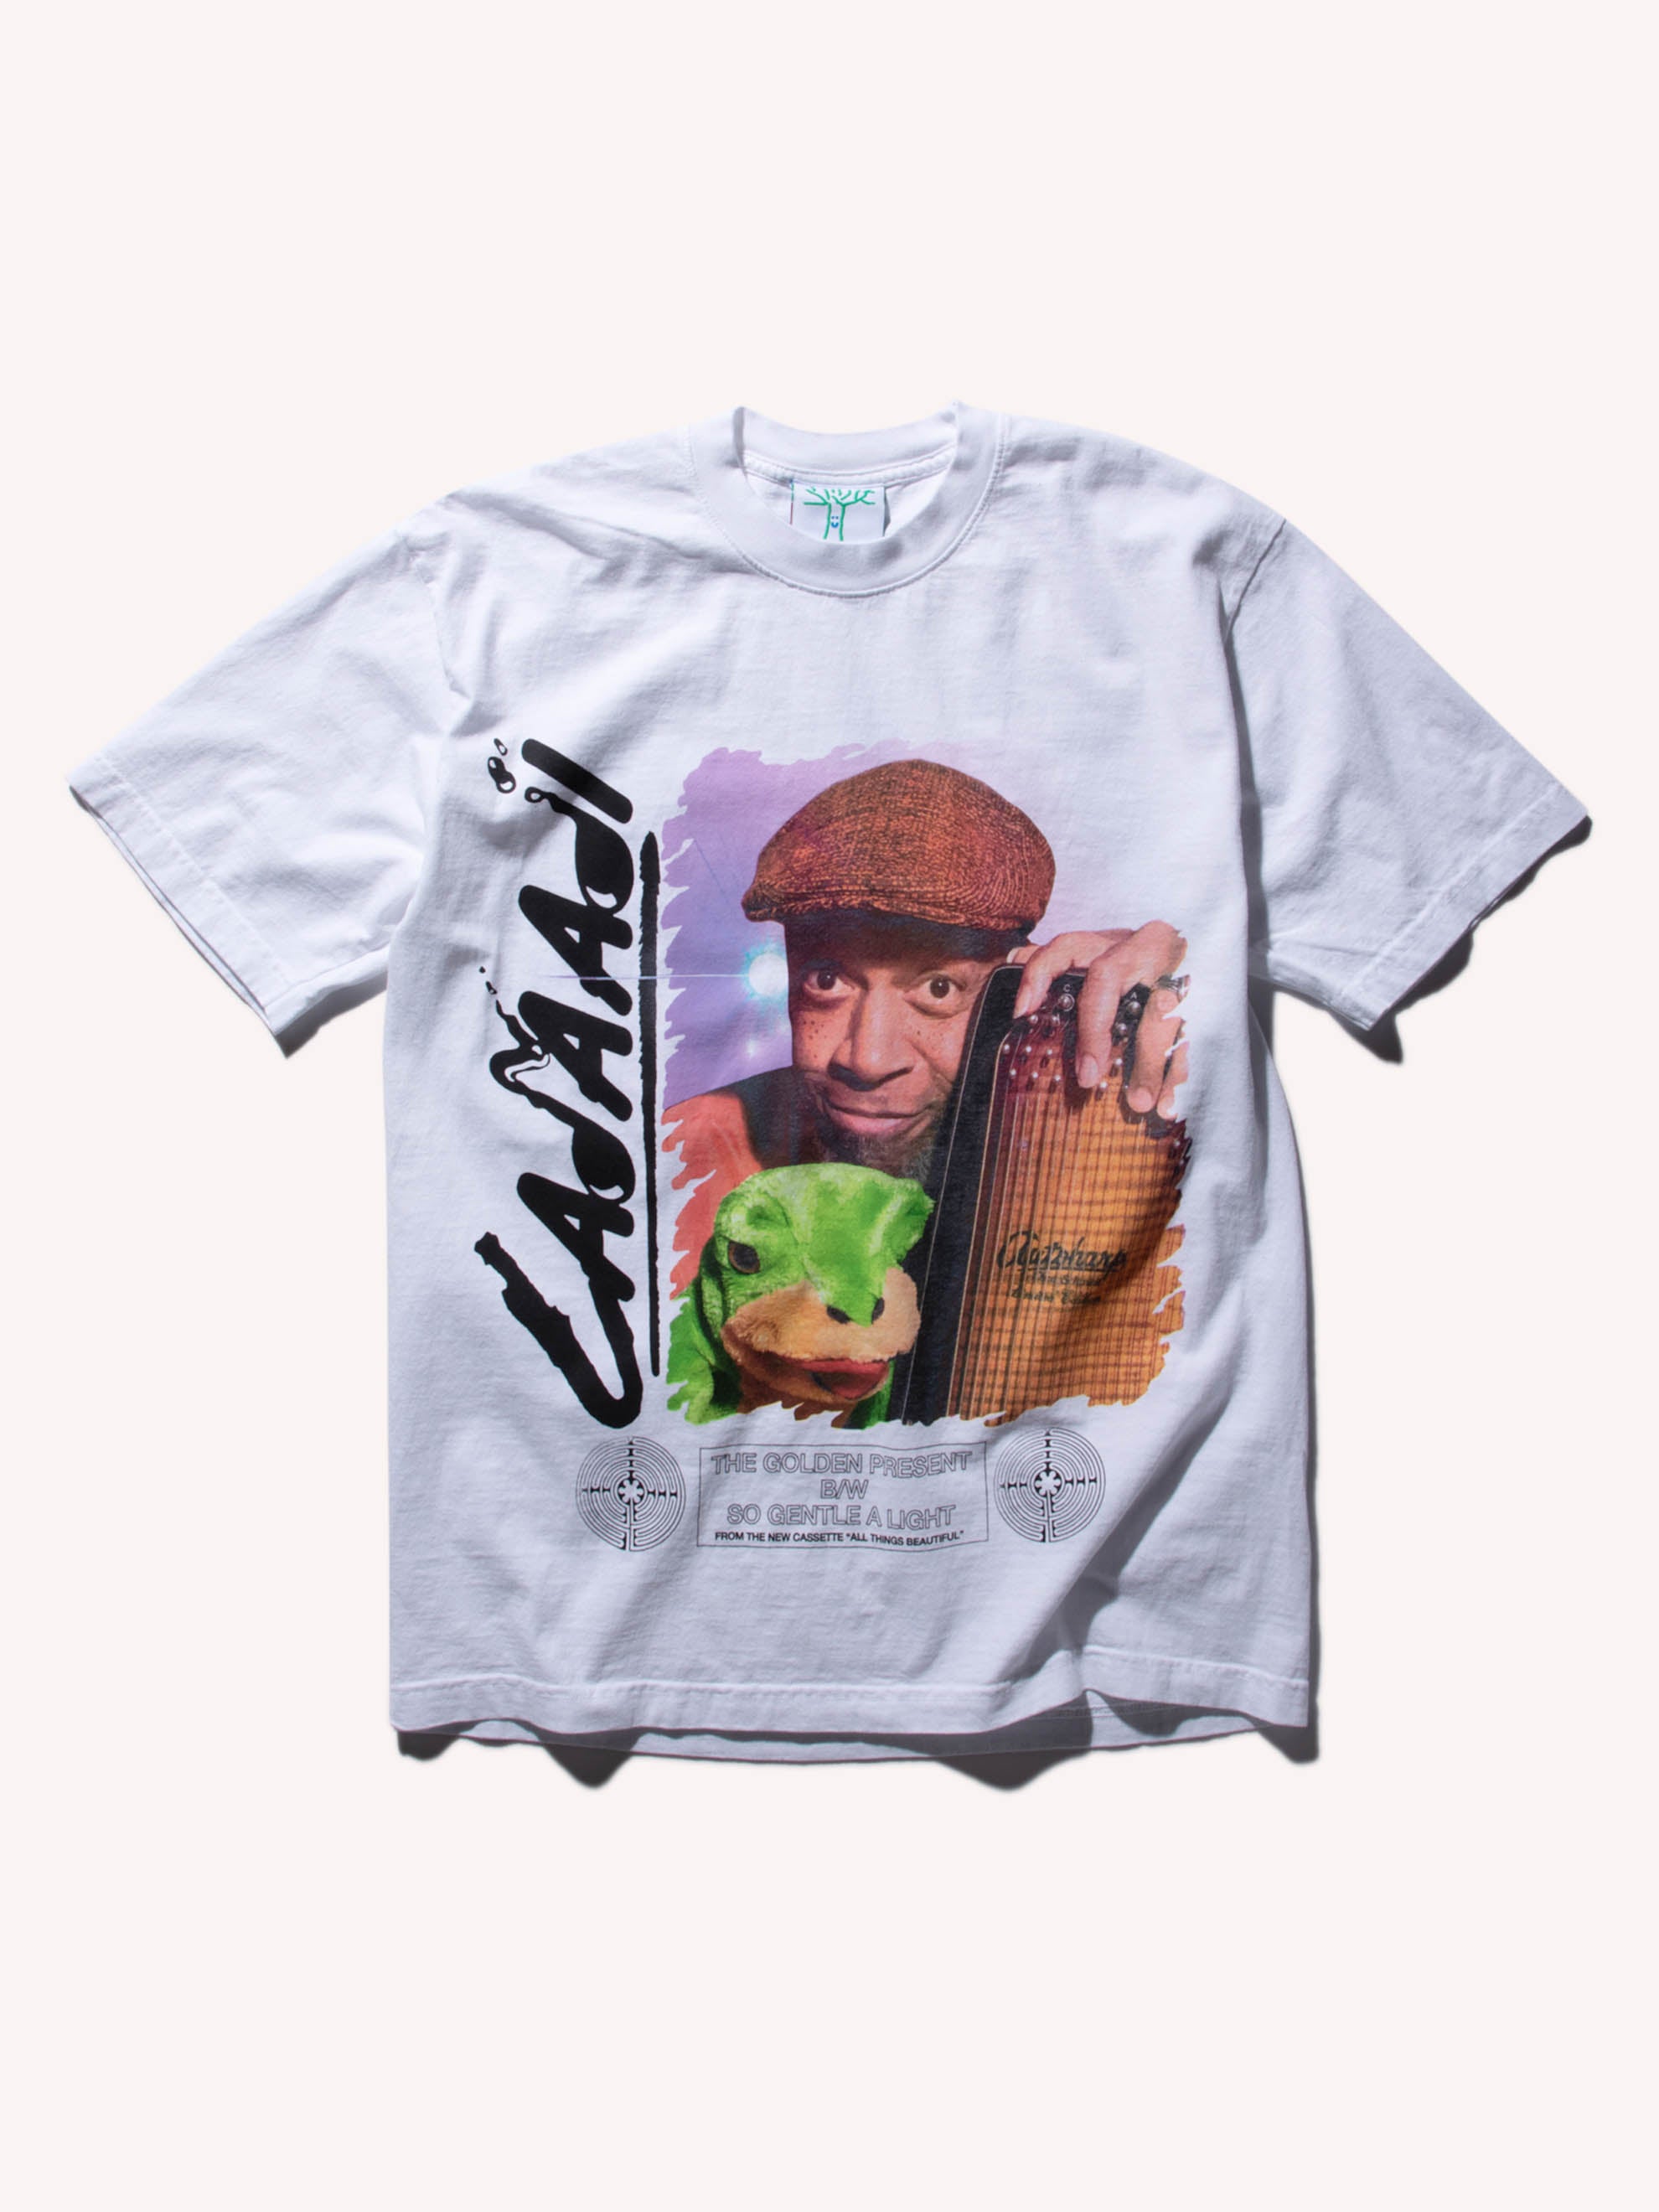 and T-Shirt Frog Online UNION Online Laraaji Ceramics at (White) ANGELES LOS Buy